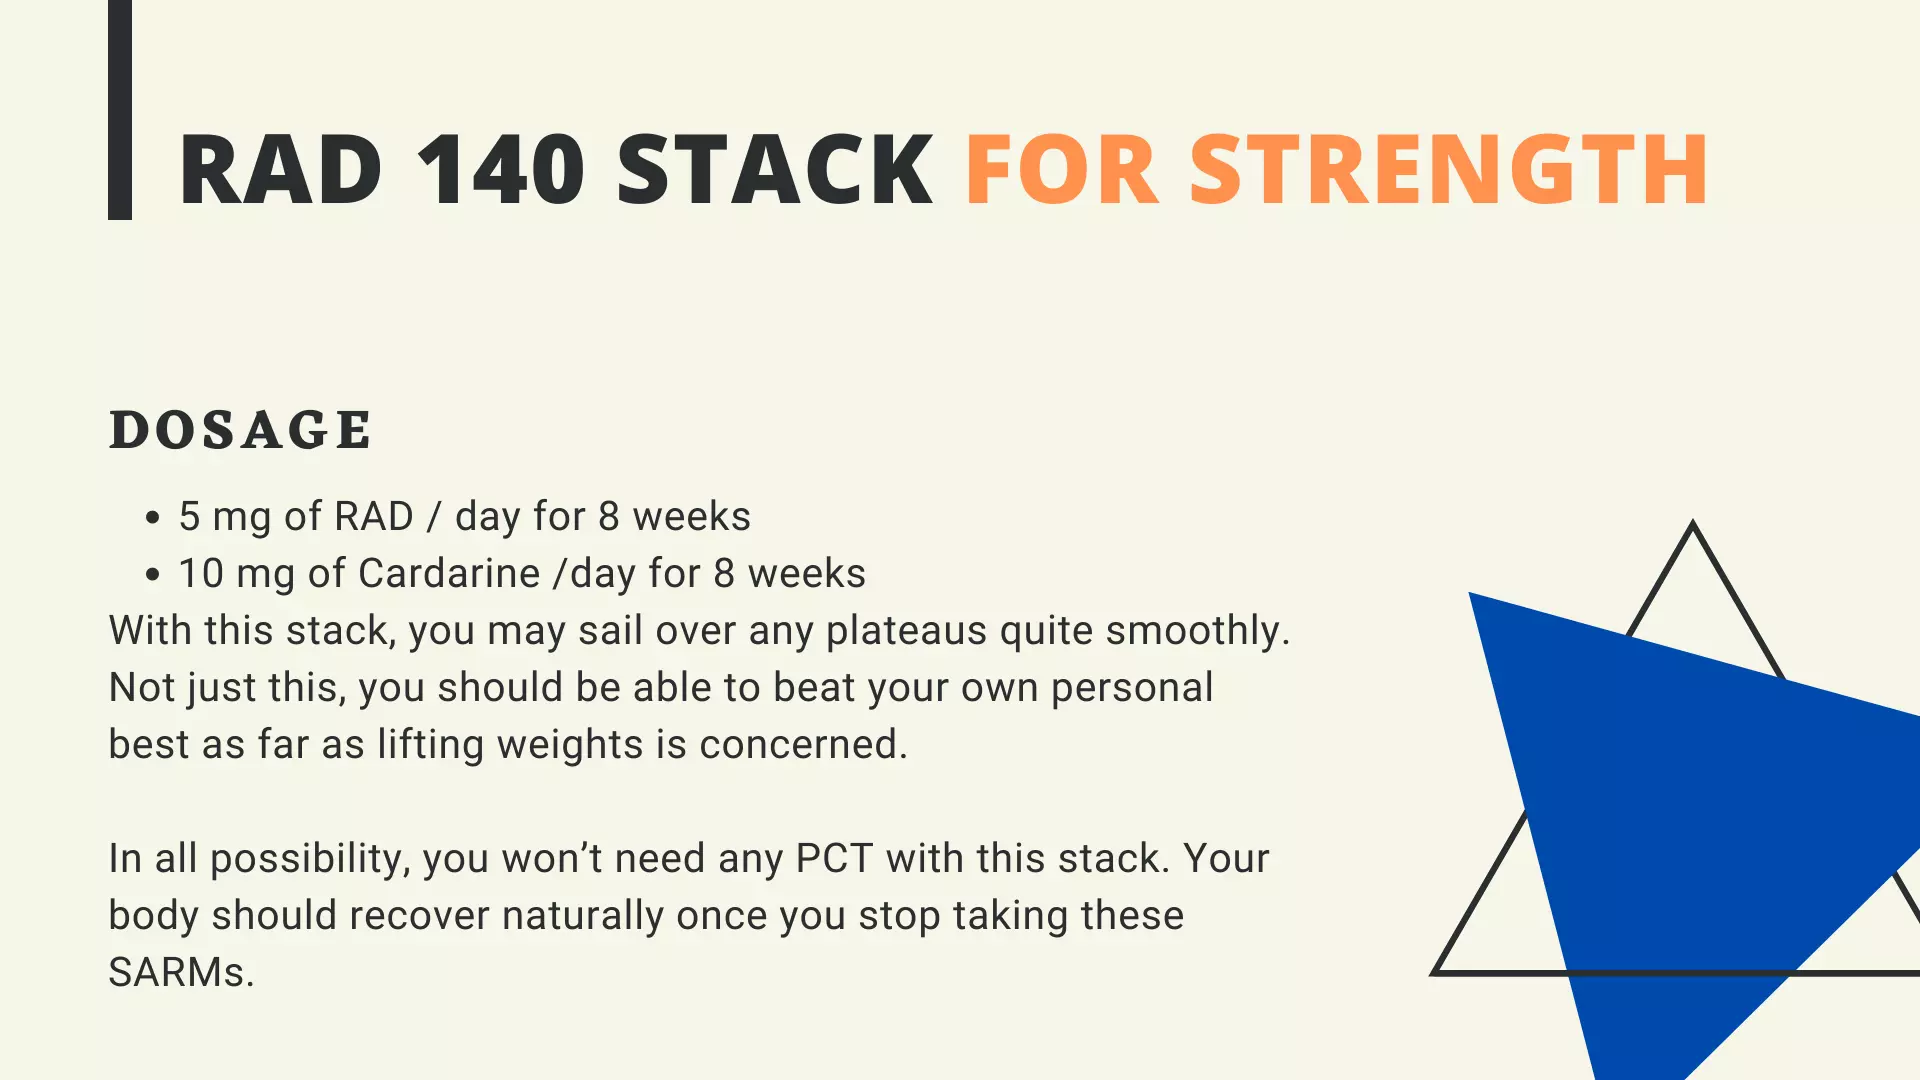 RAD 140 Stack For Strength